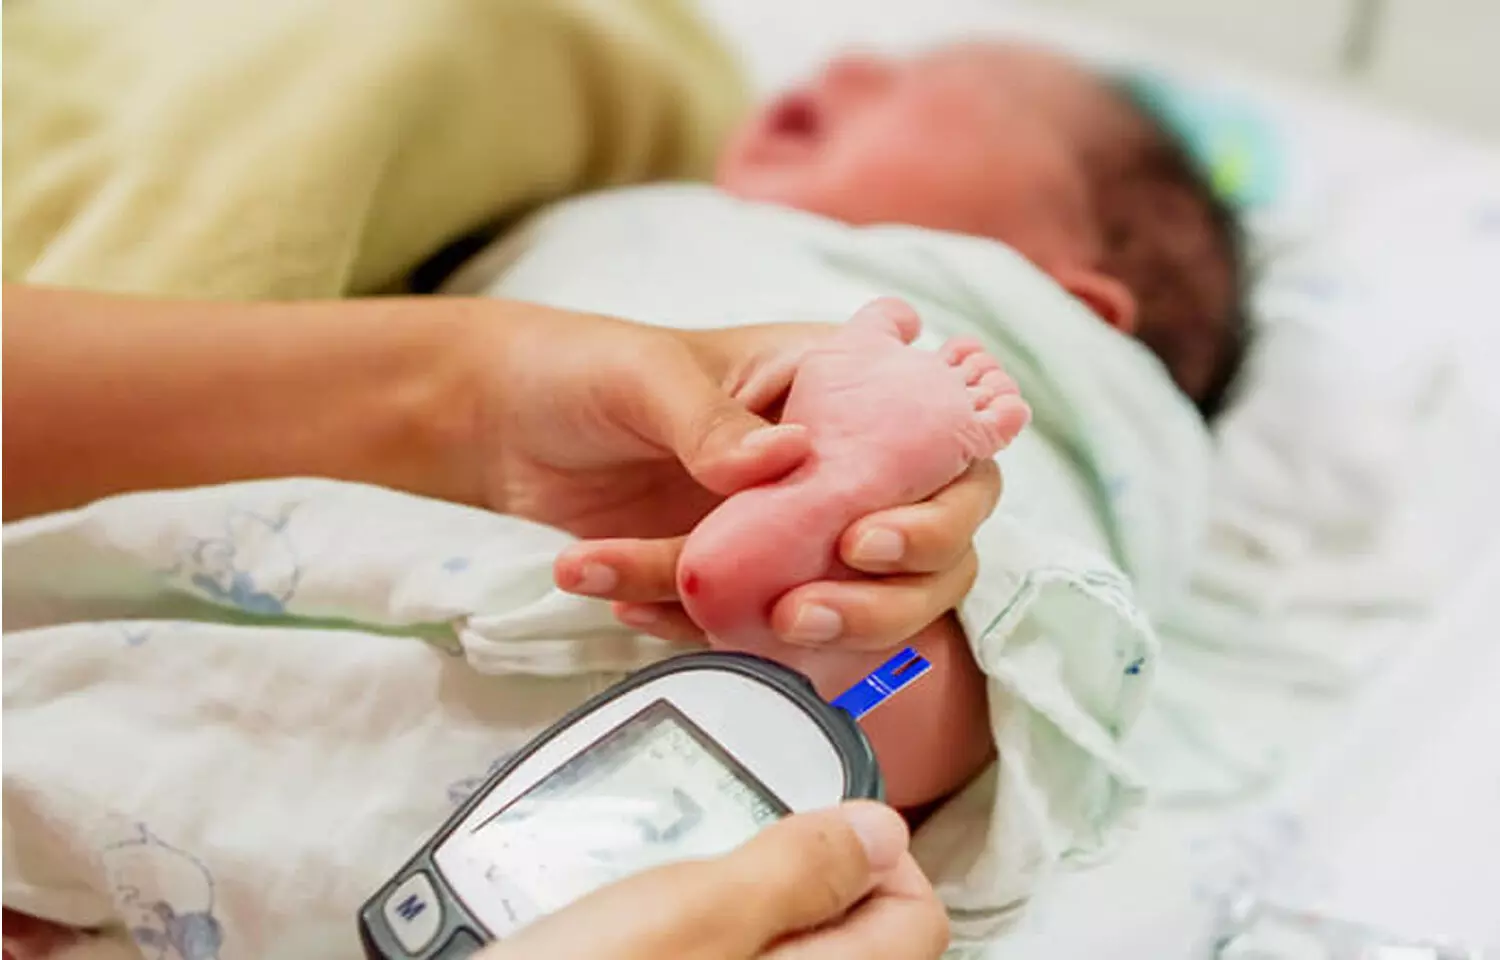 Neonates with low gestational age and birthweight at increased risk of elevated BP and CKD